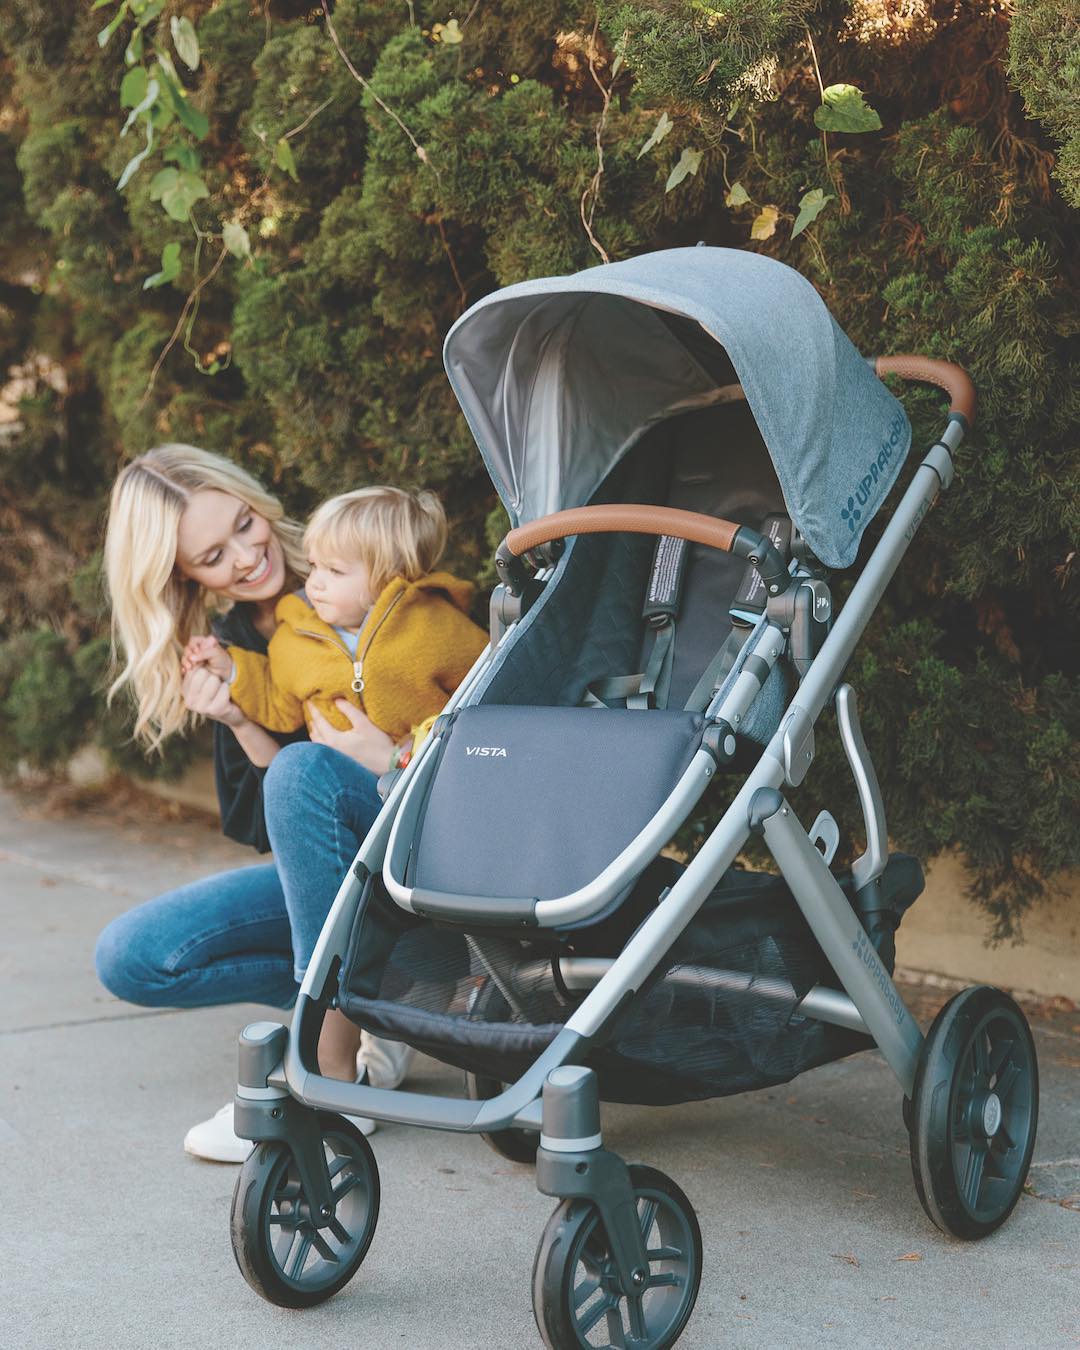 Stroller Comparison: UPPAbaby Vista vs. Baby Jogger City Select Lux